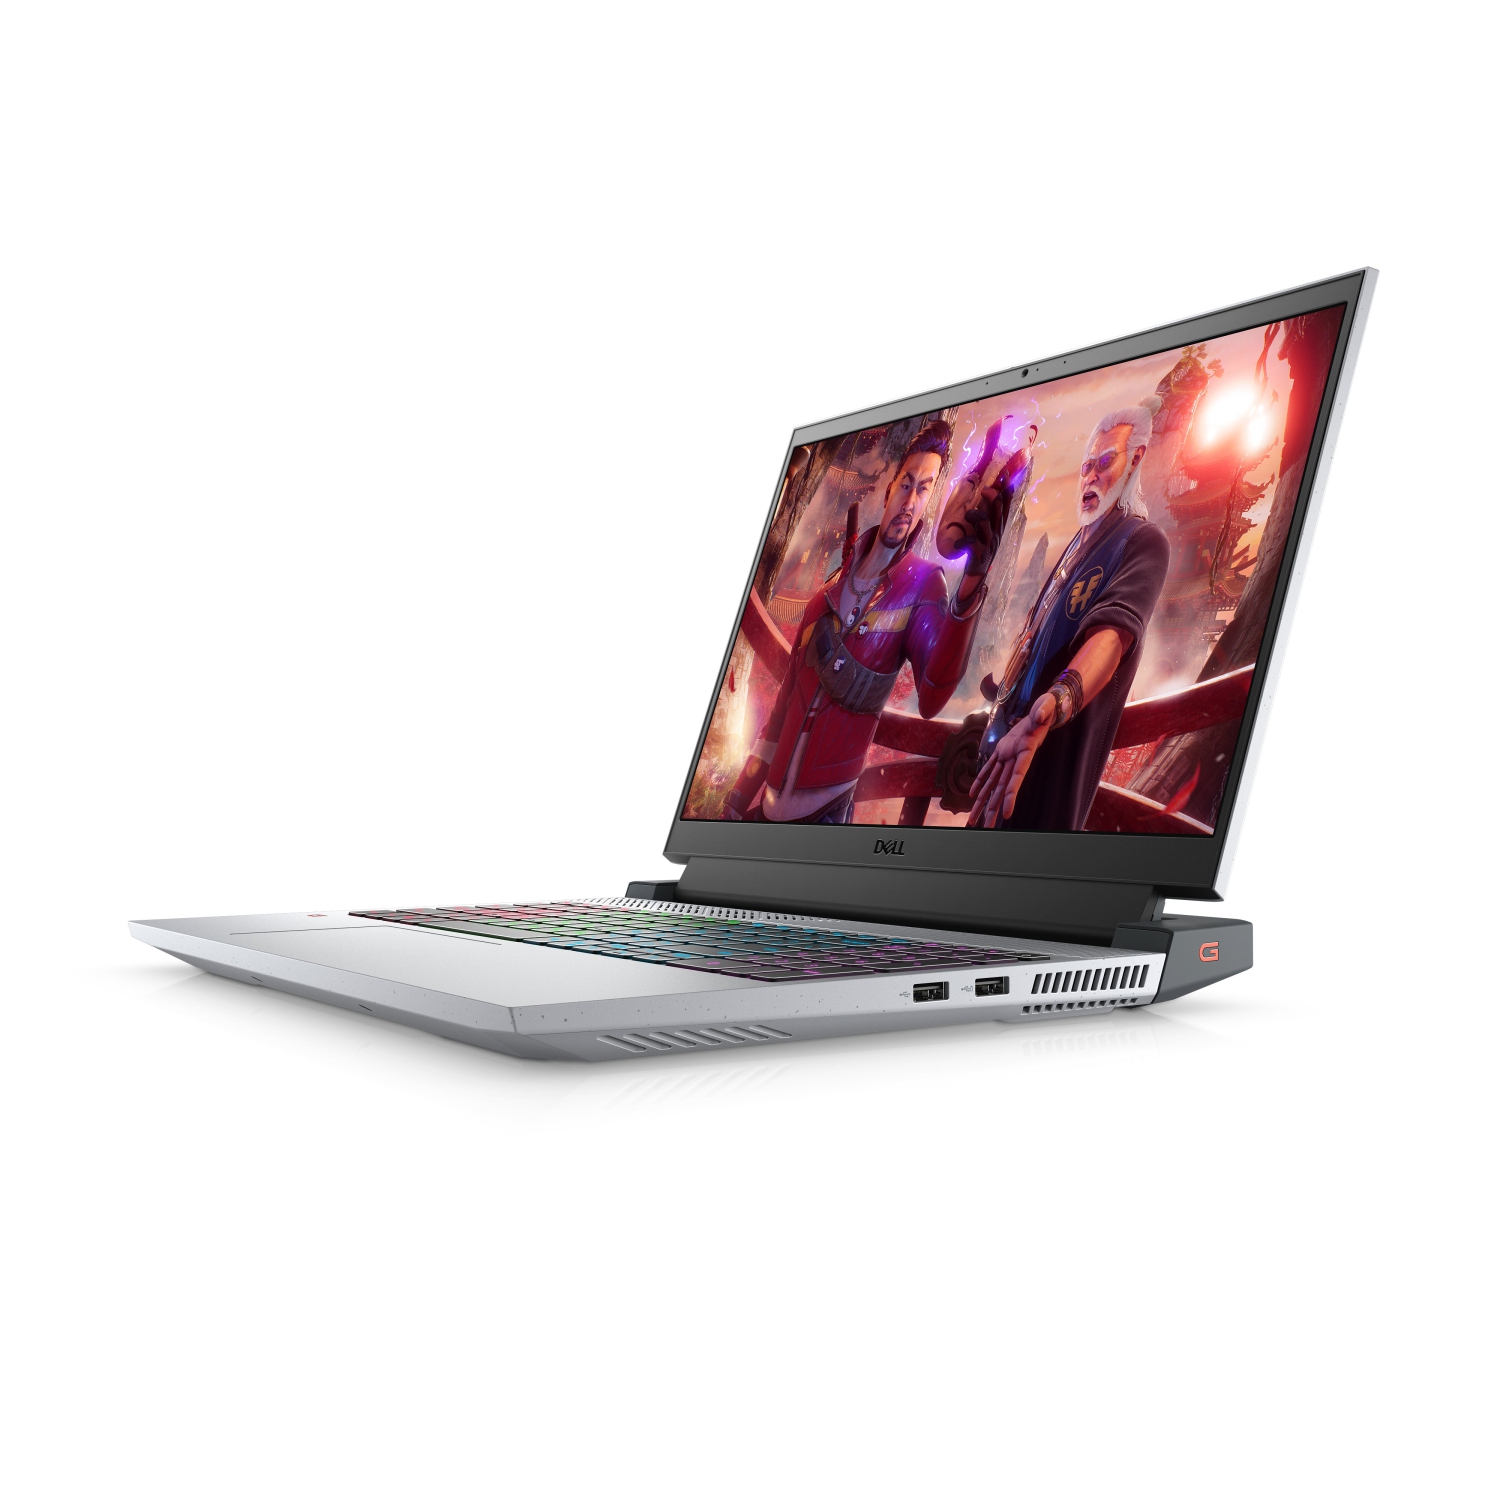 Refurbished (Excellent) - Dell G15 5515 Gaming Laptop (2021), 15.6" FHD, Core Ryzen 7, 512GB SSD + 512GB SSD, 16GB RAM, RTX 3060, 8 Cores @ 4.4 GHz Certified Refurbished